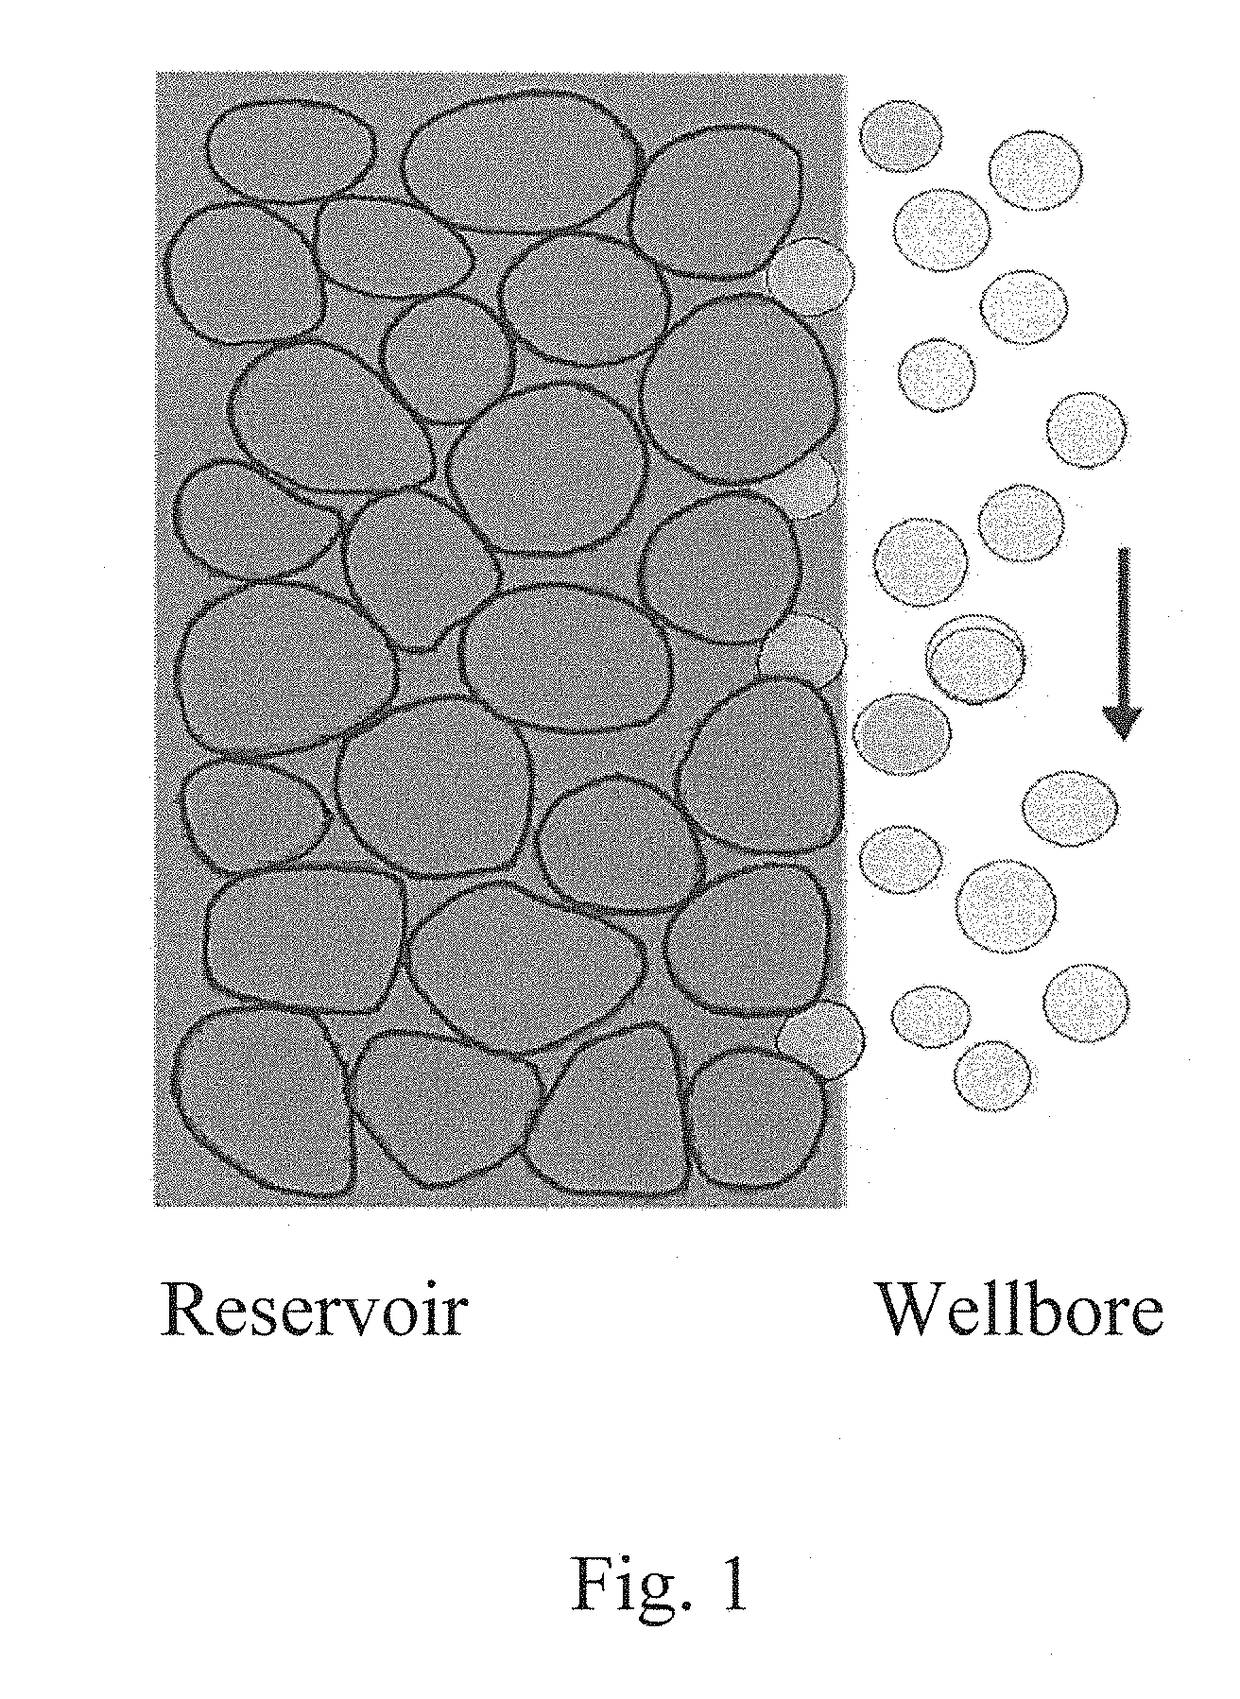 Water-based drilling fluid for protecting high-permeability reservoirs, and preparation method and use thereof